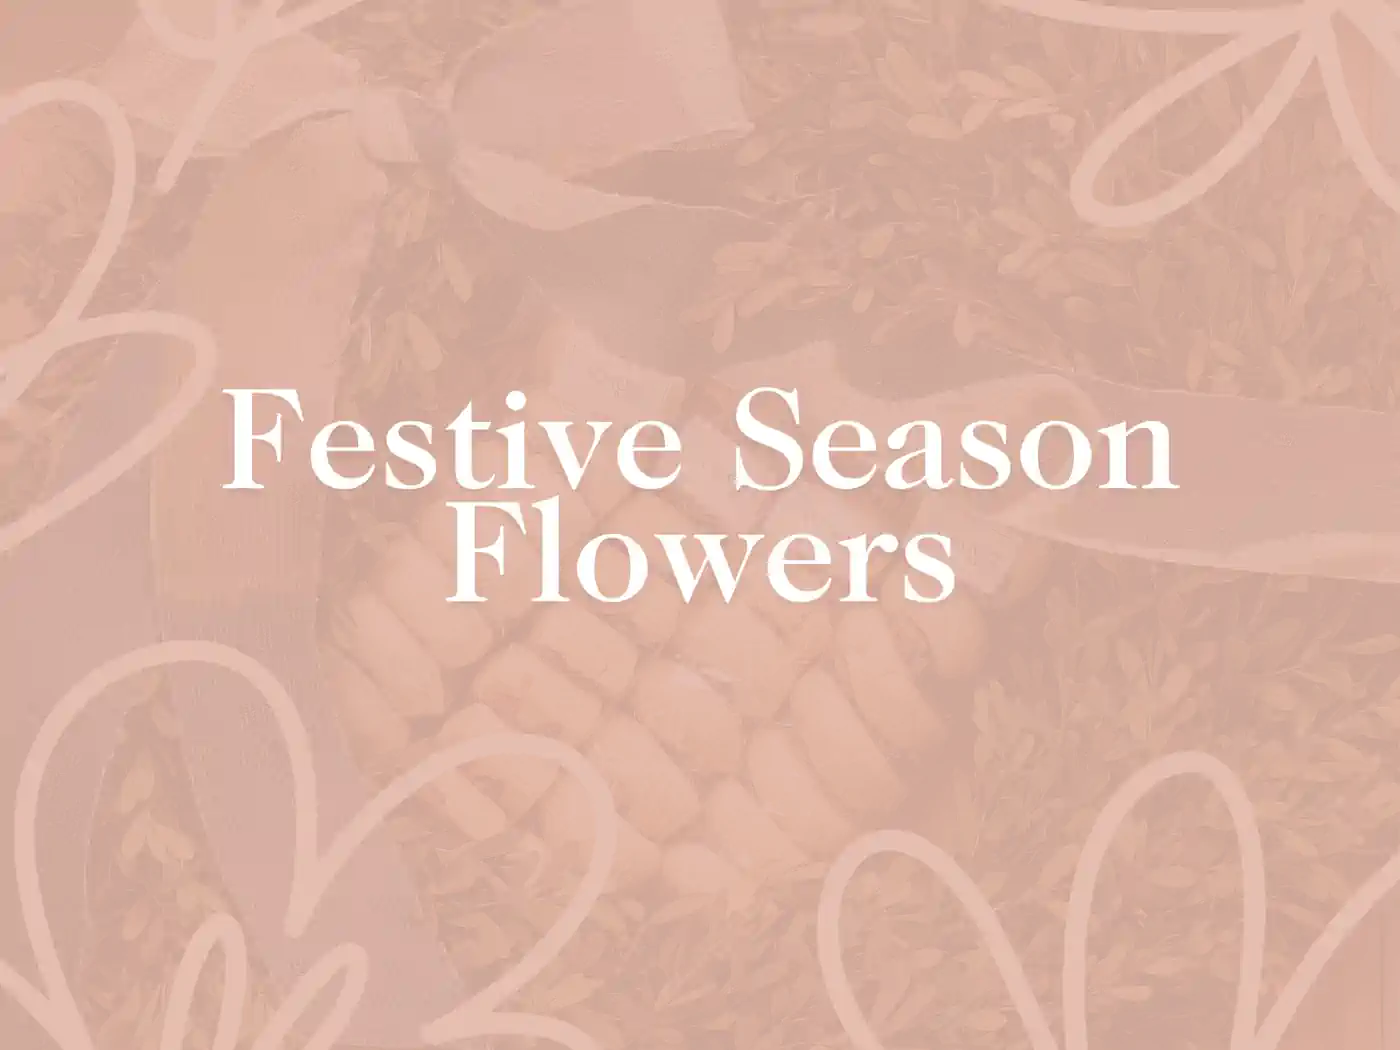 A beautifully arranged Festive Season Flowers Collection, complete with vibrant floral decorations, ribbon, and seasonal gifts, bringing joy and warmth to a gathering. Delivered with heart by Fabulous Flowers and Gifts.